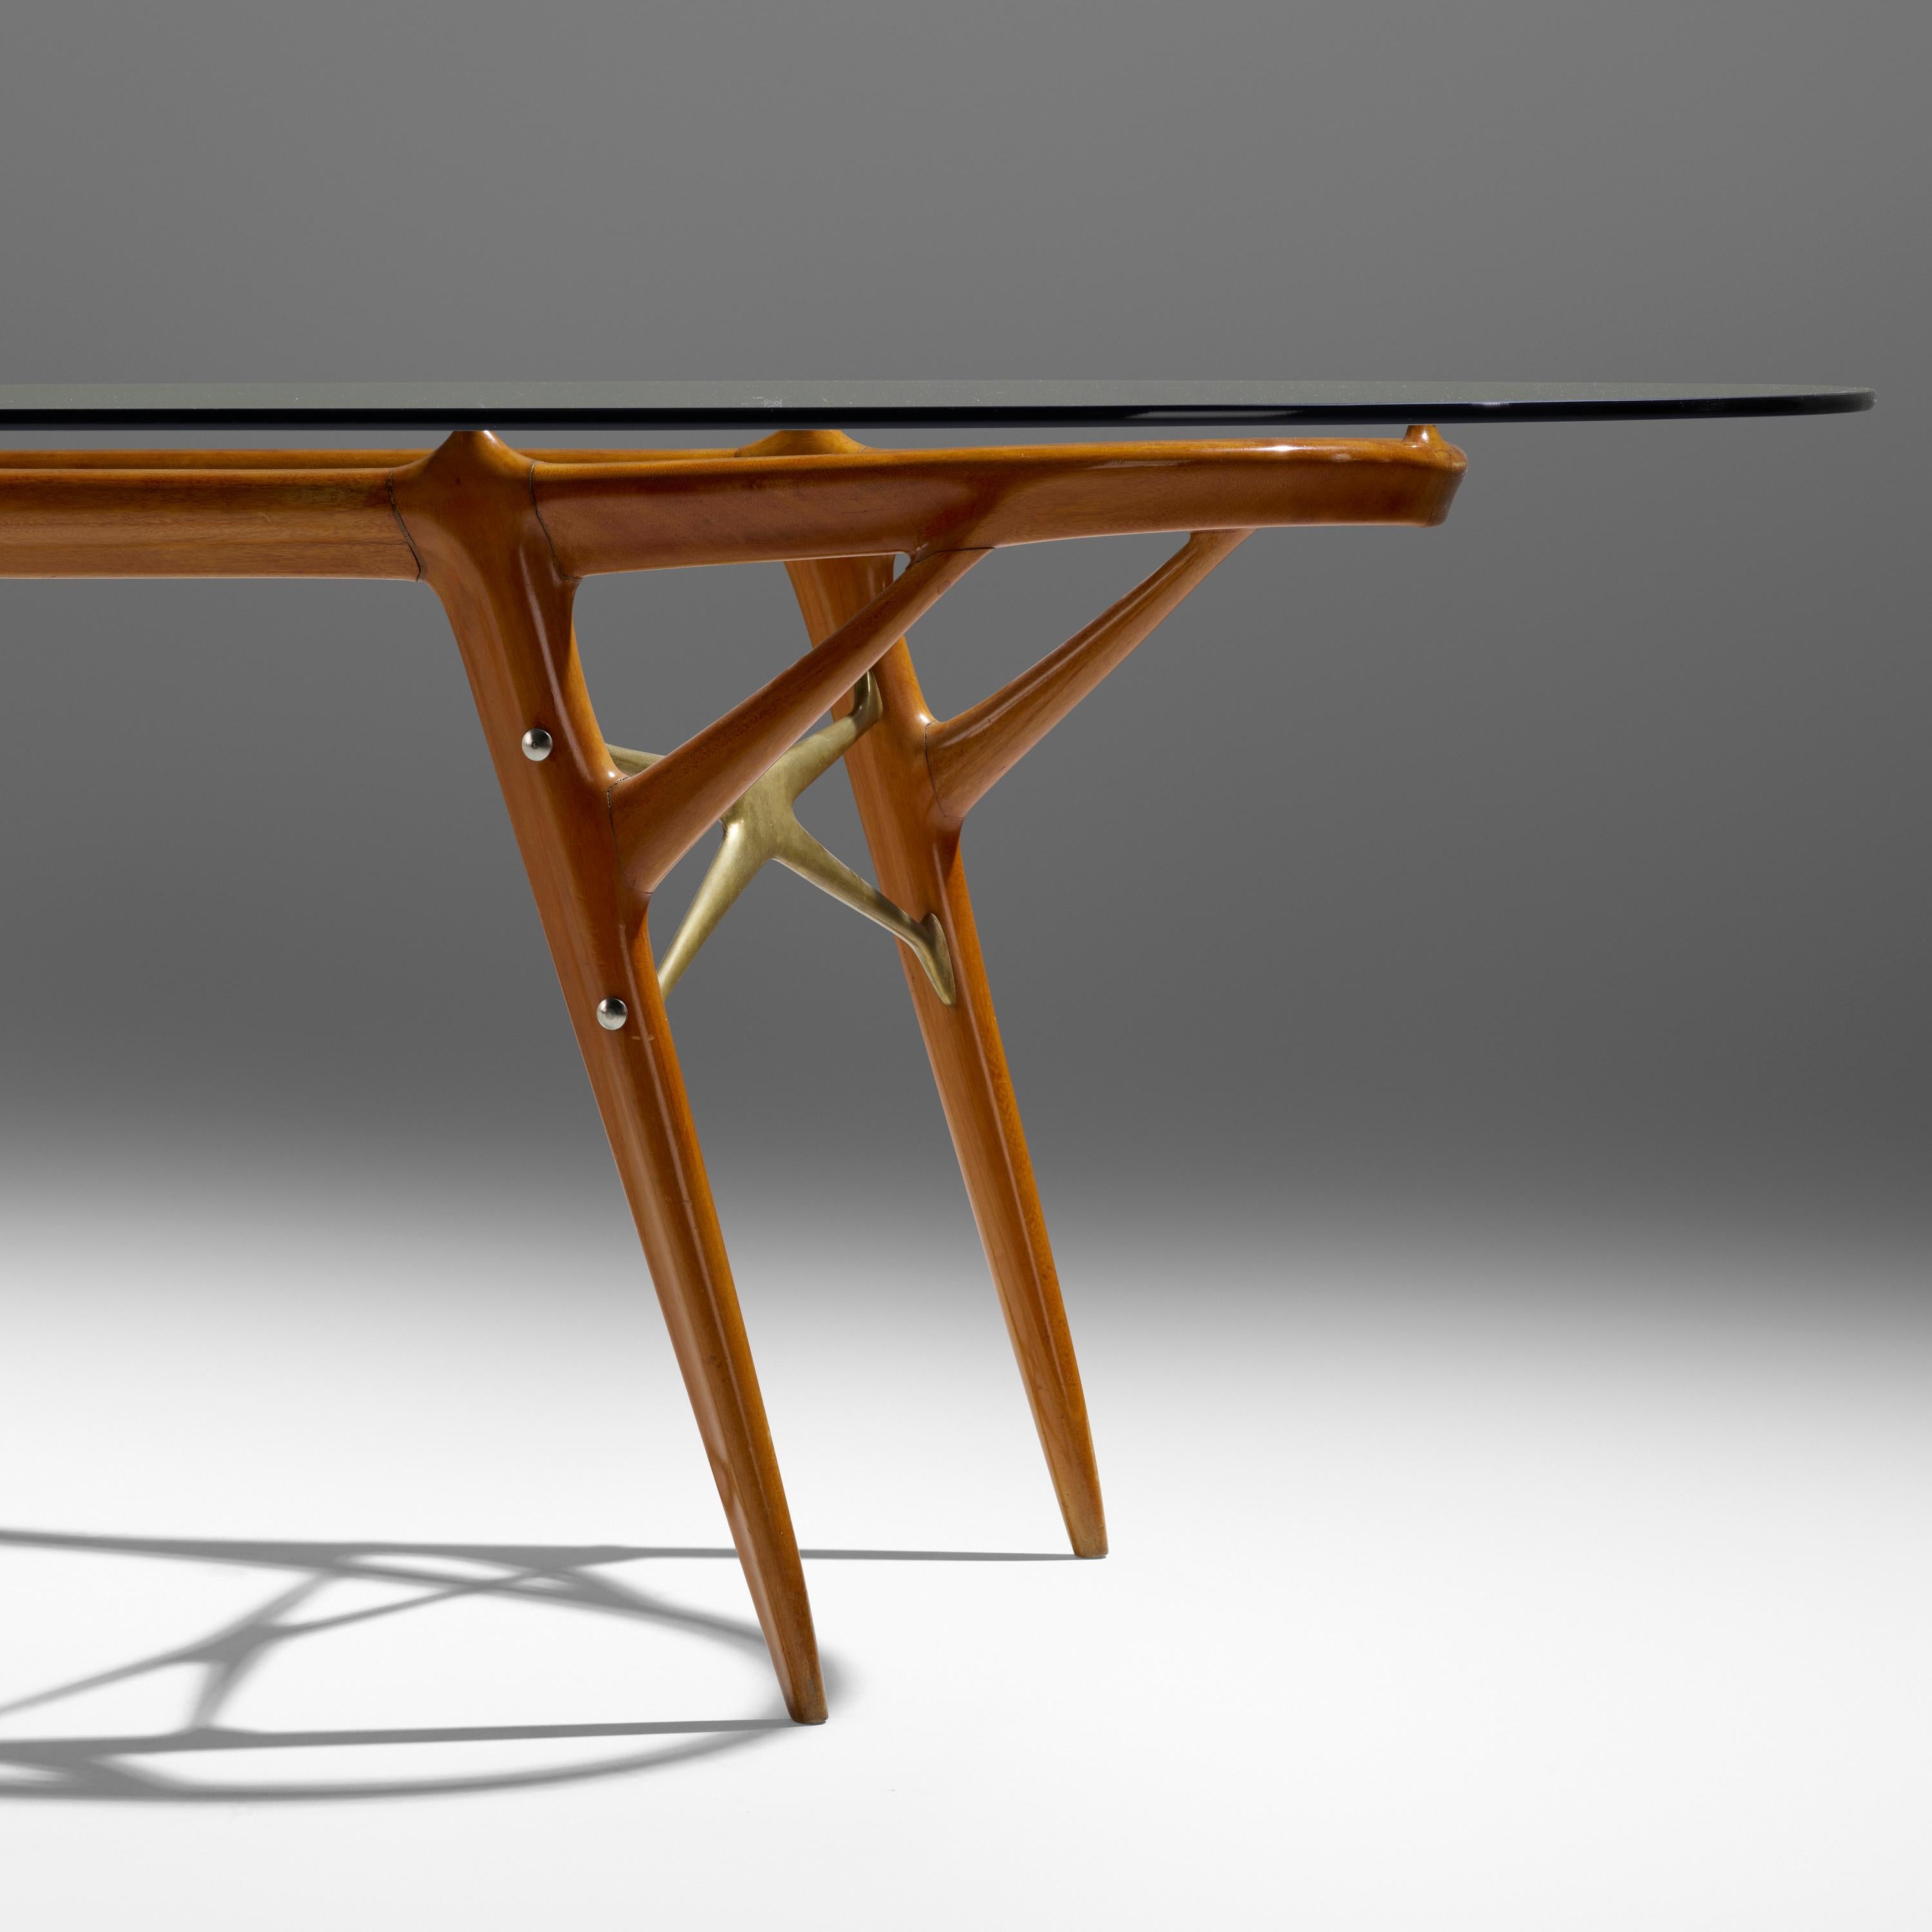 Ico Parisi (1916 - 1996) and Luisa Parisi (1914 - 1990)

A stunning and highly unusual dining table by visionary Italian designers Ico and Luisa Parisi, in blond elm with significant bronze detailing and a glass top. Four tapering, Y-shaped legs,